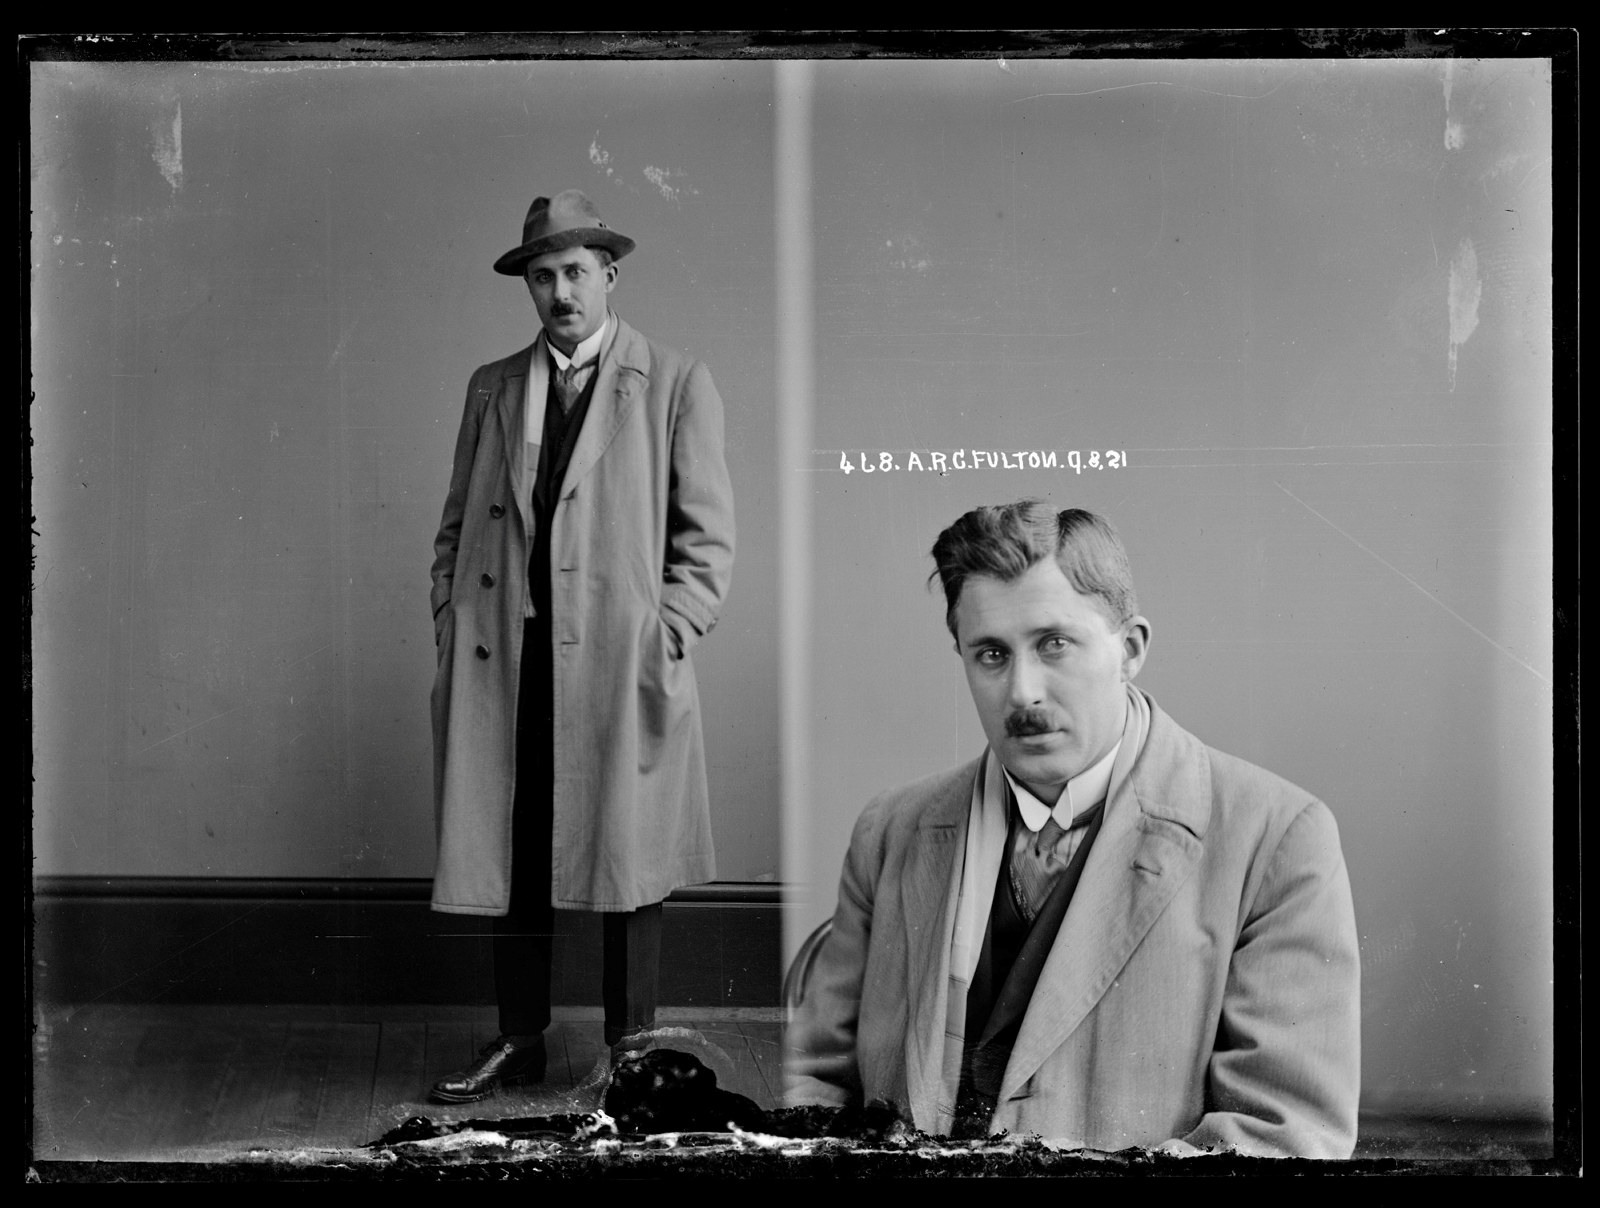 Dual black and white mugshot, man standing with hat on (left) and seated (right).